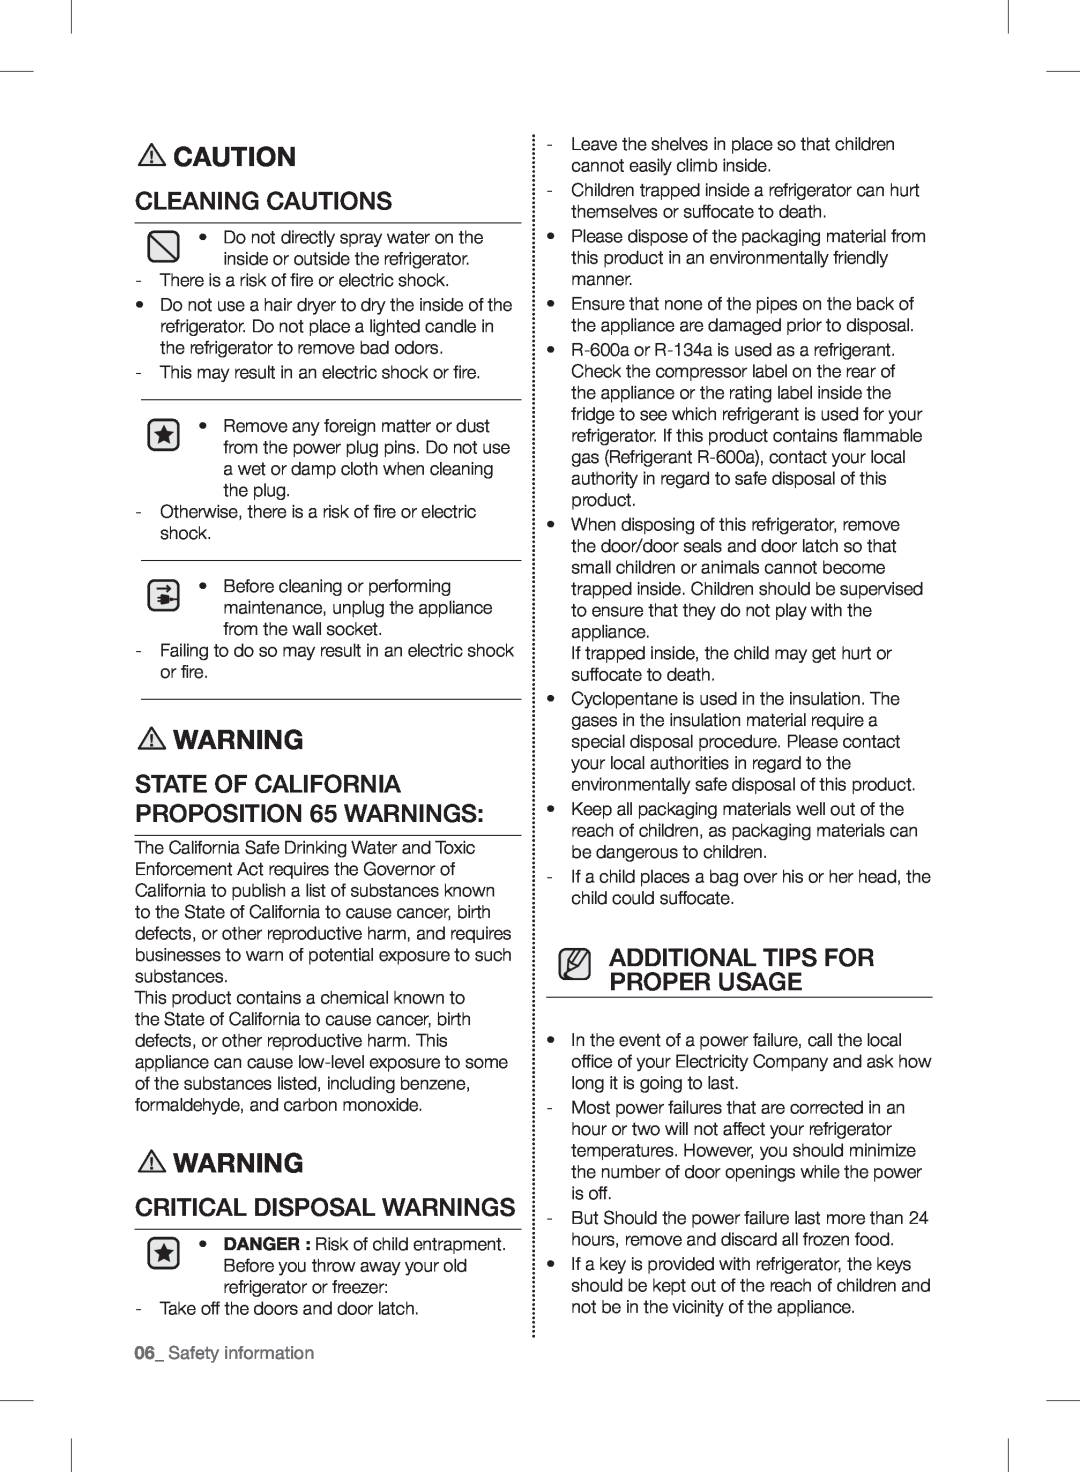 Samsung RF24FSEDBSR user manual Cleaning Cautions, STATE OF CALIFORNIA PROPOSITION 65 WARNINGS, Critical Disposal Warnings 